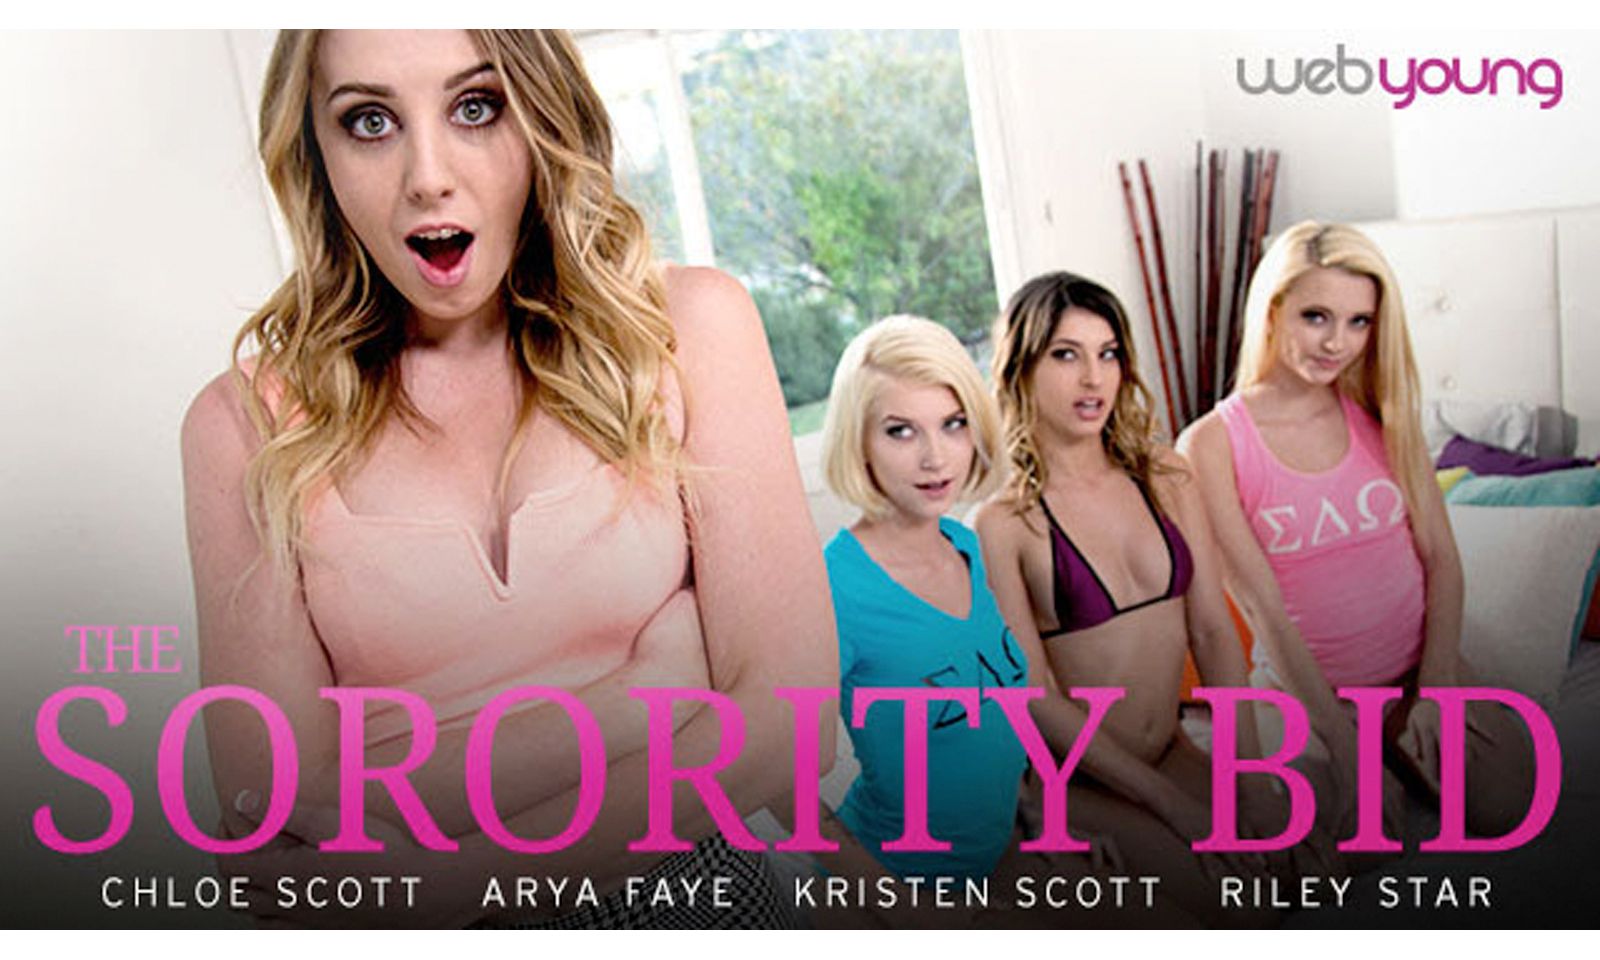 ‘The Sorority Bid’ Available Now from Girlsway